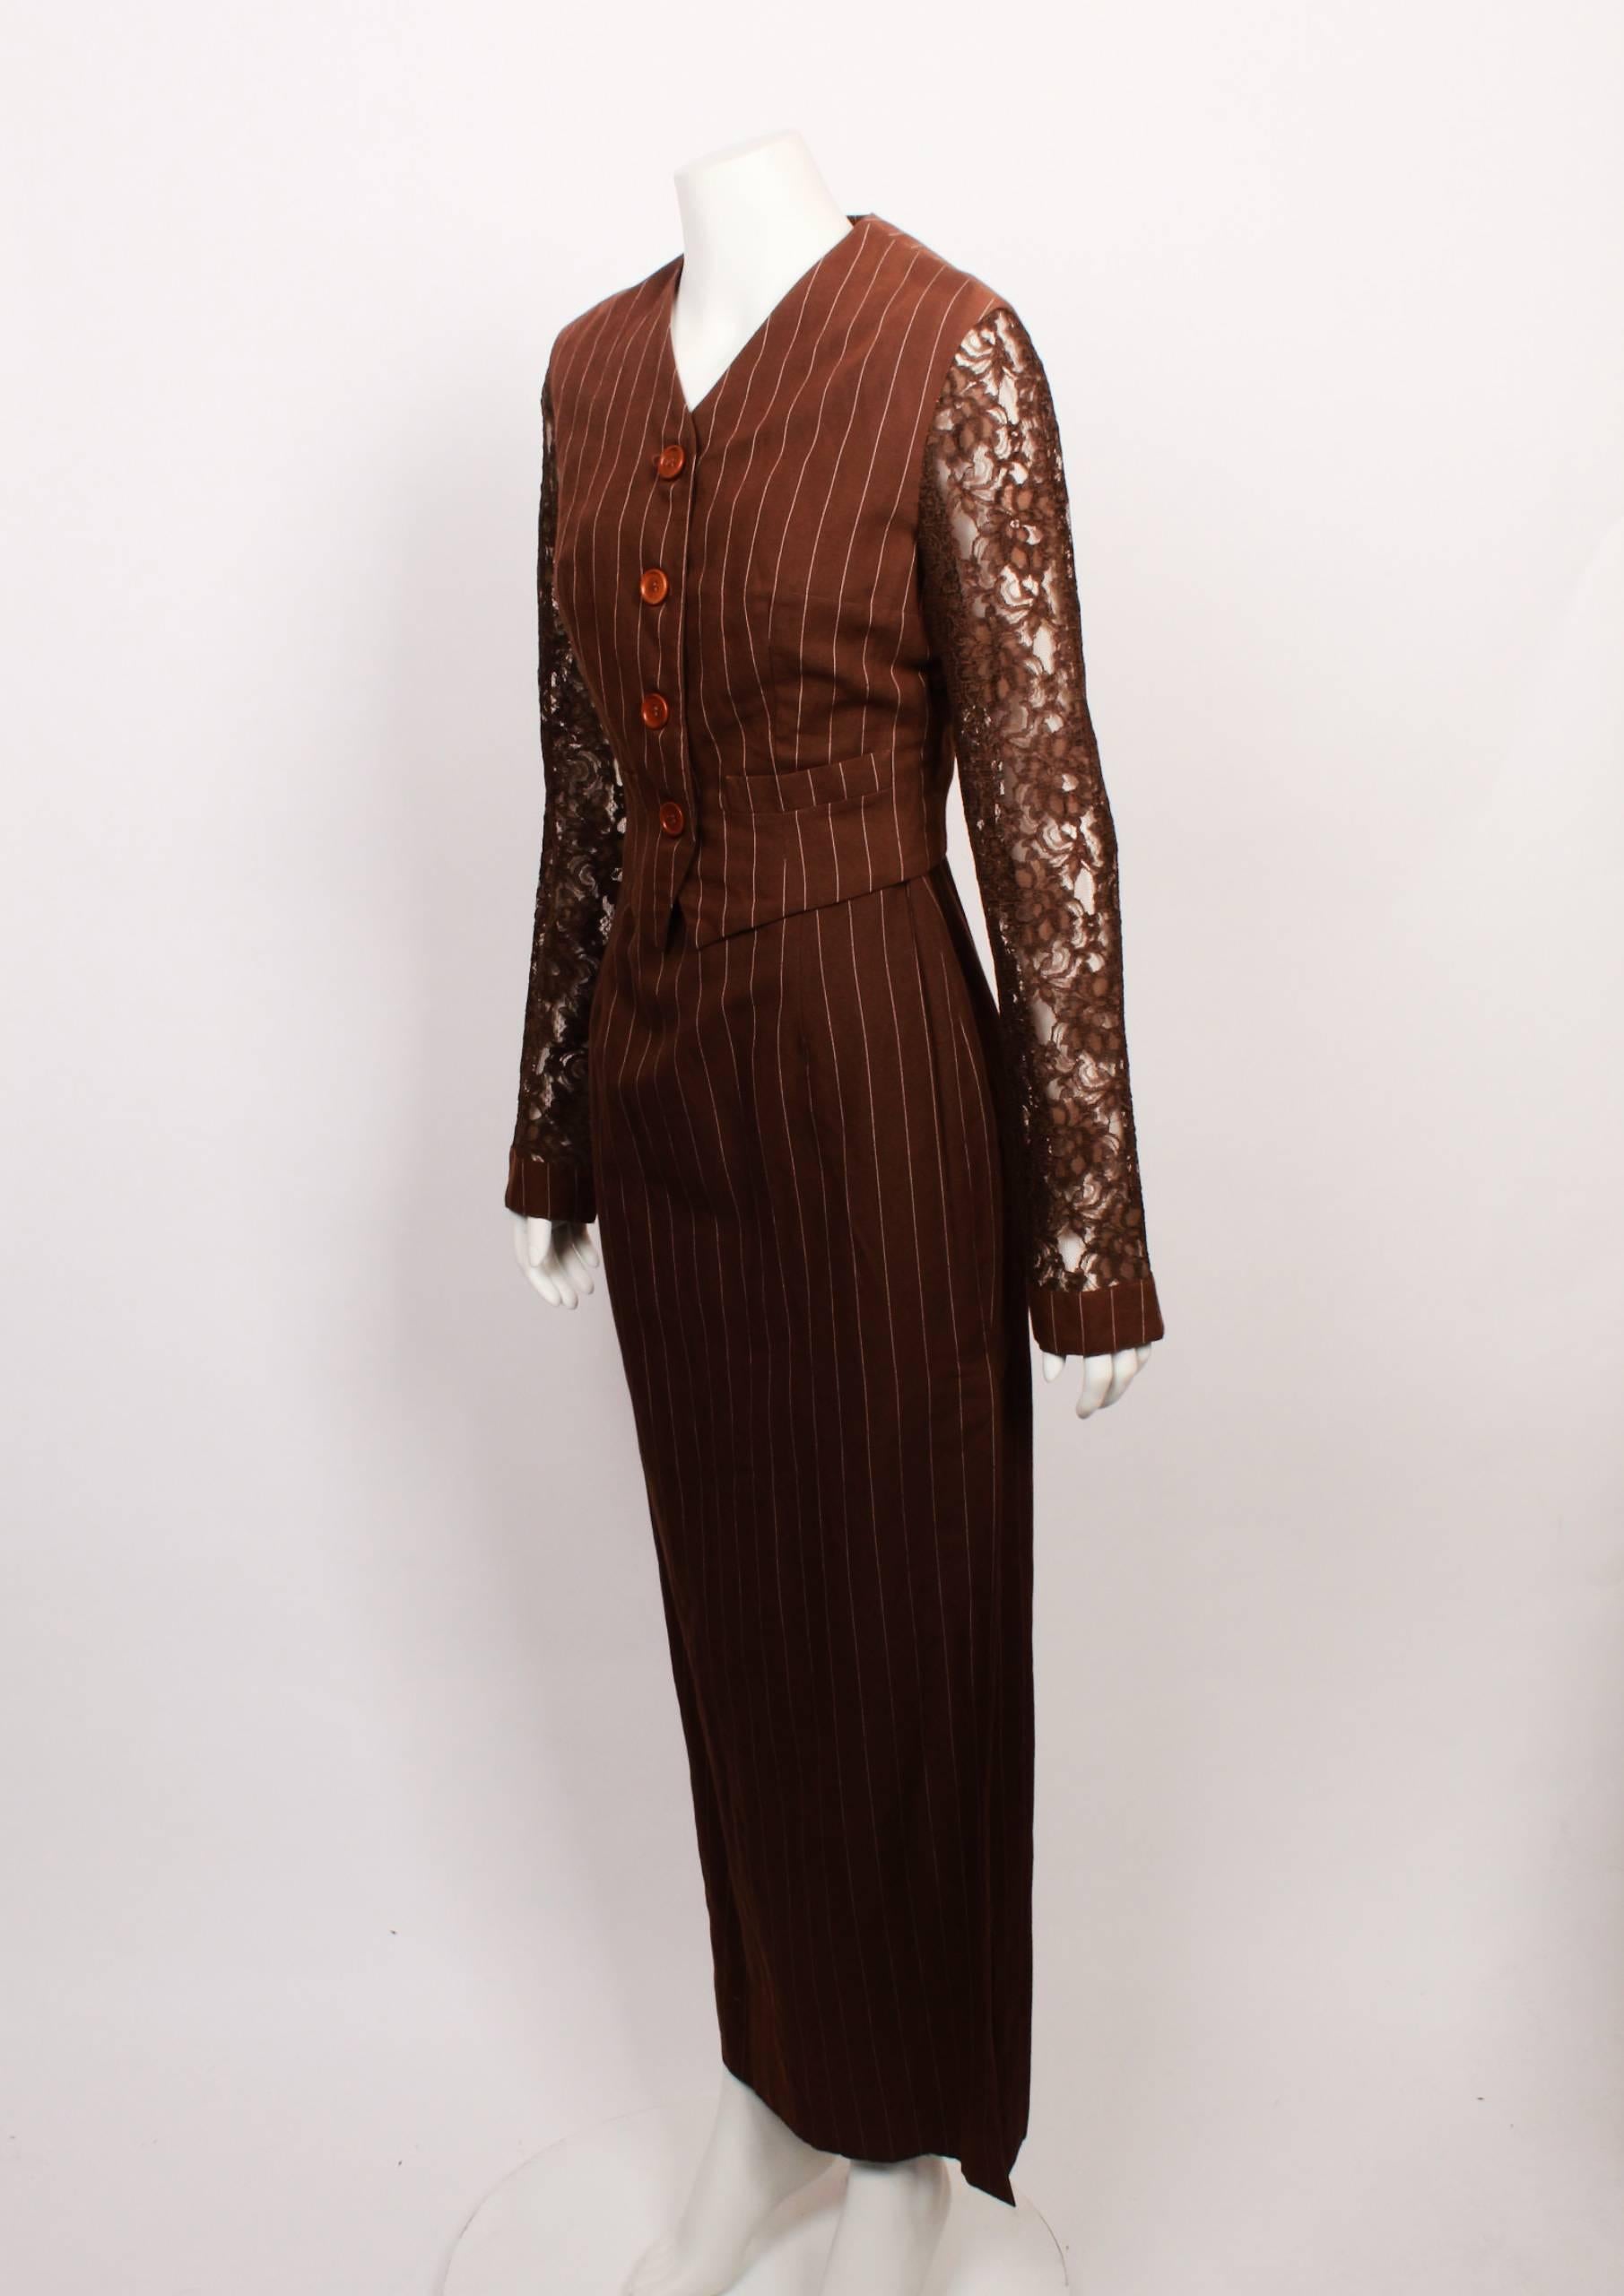 Chocolate Brown Pinstriped Jacket & Dress Set.
Lace Sleeve Detail. 